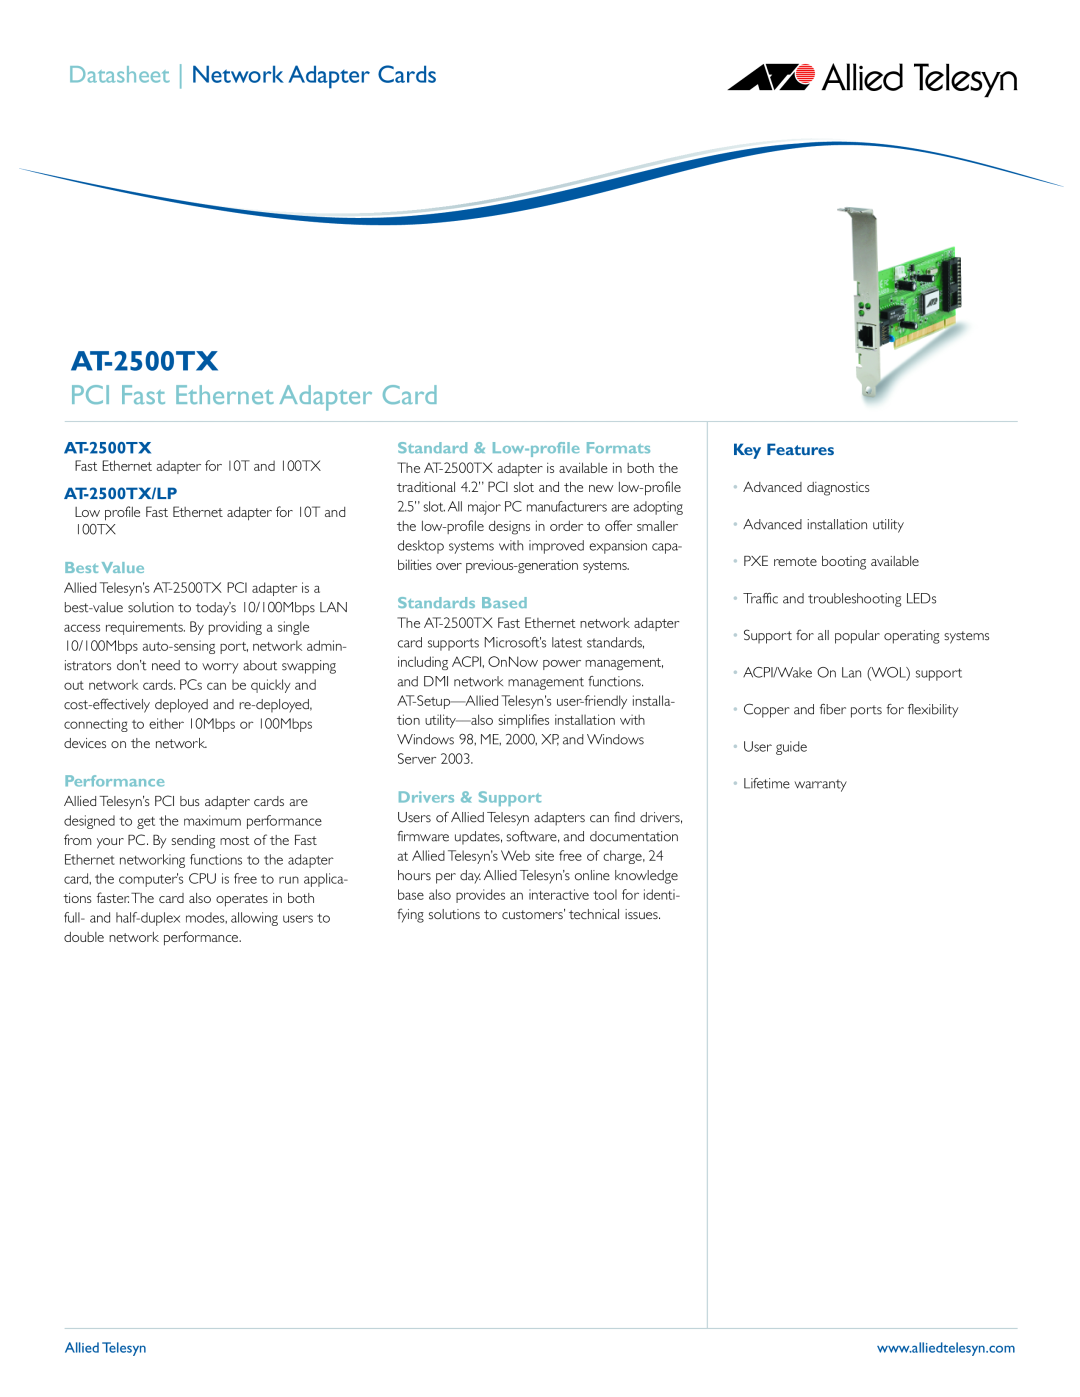 Allied Telesis warranty PCI Fast Ethernet Adapter Card, AT-2500TX/LP, Key Features, Datasheet Network Adapter Cards 